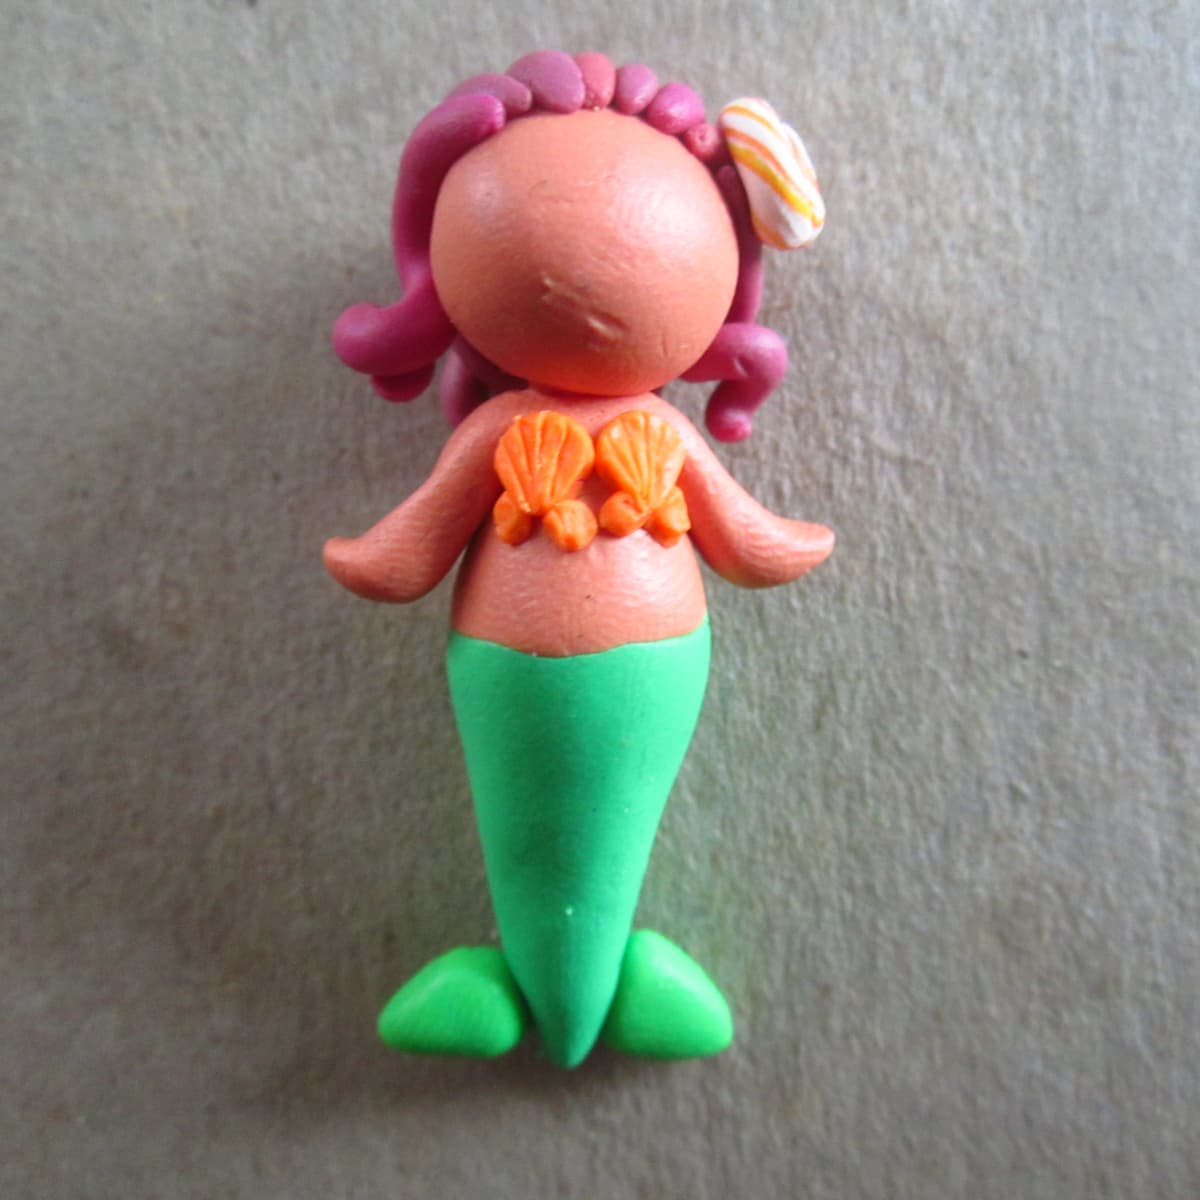 Help] Should I use plasticine or oven bake clay to make little figures like  these? : r/Sculpture